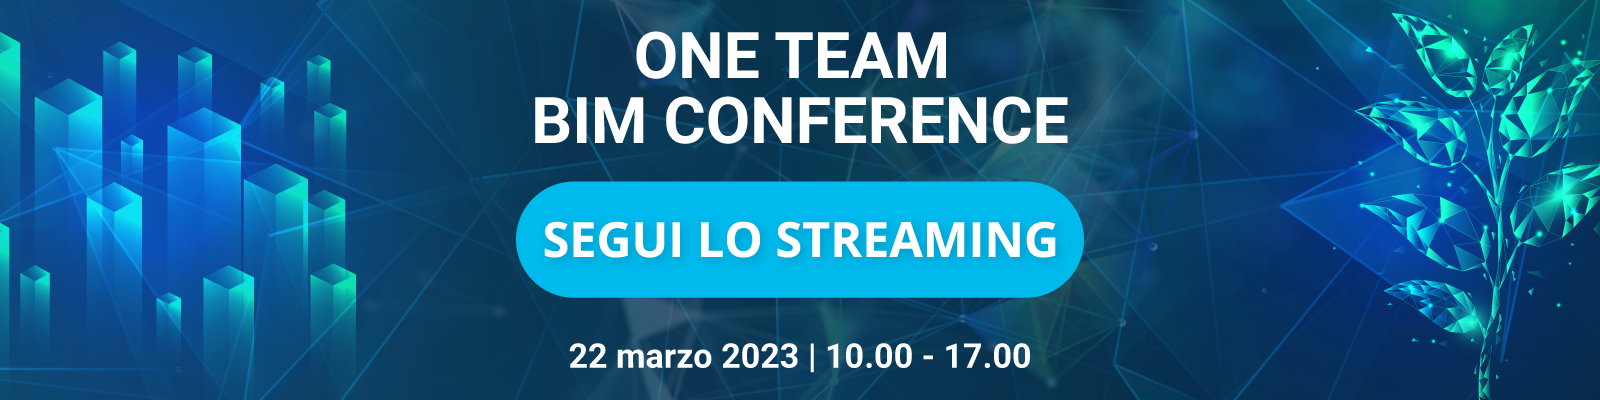 one team bim conference streaming